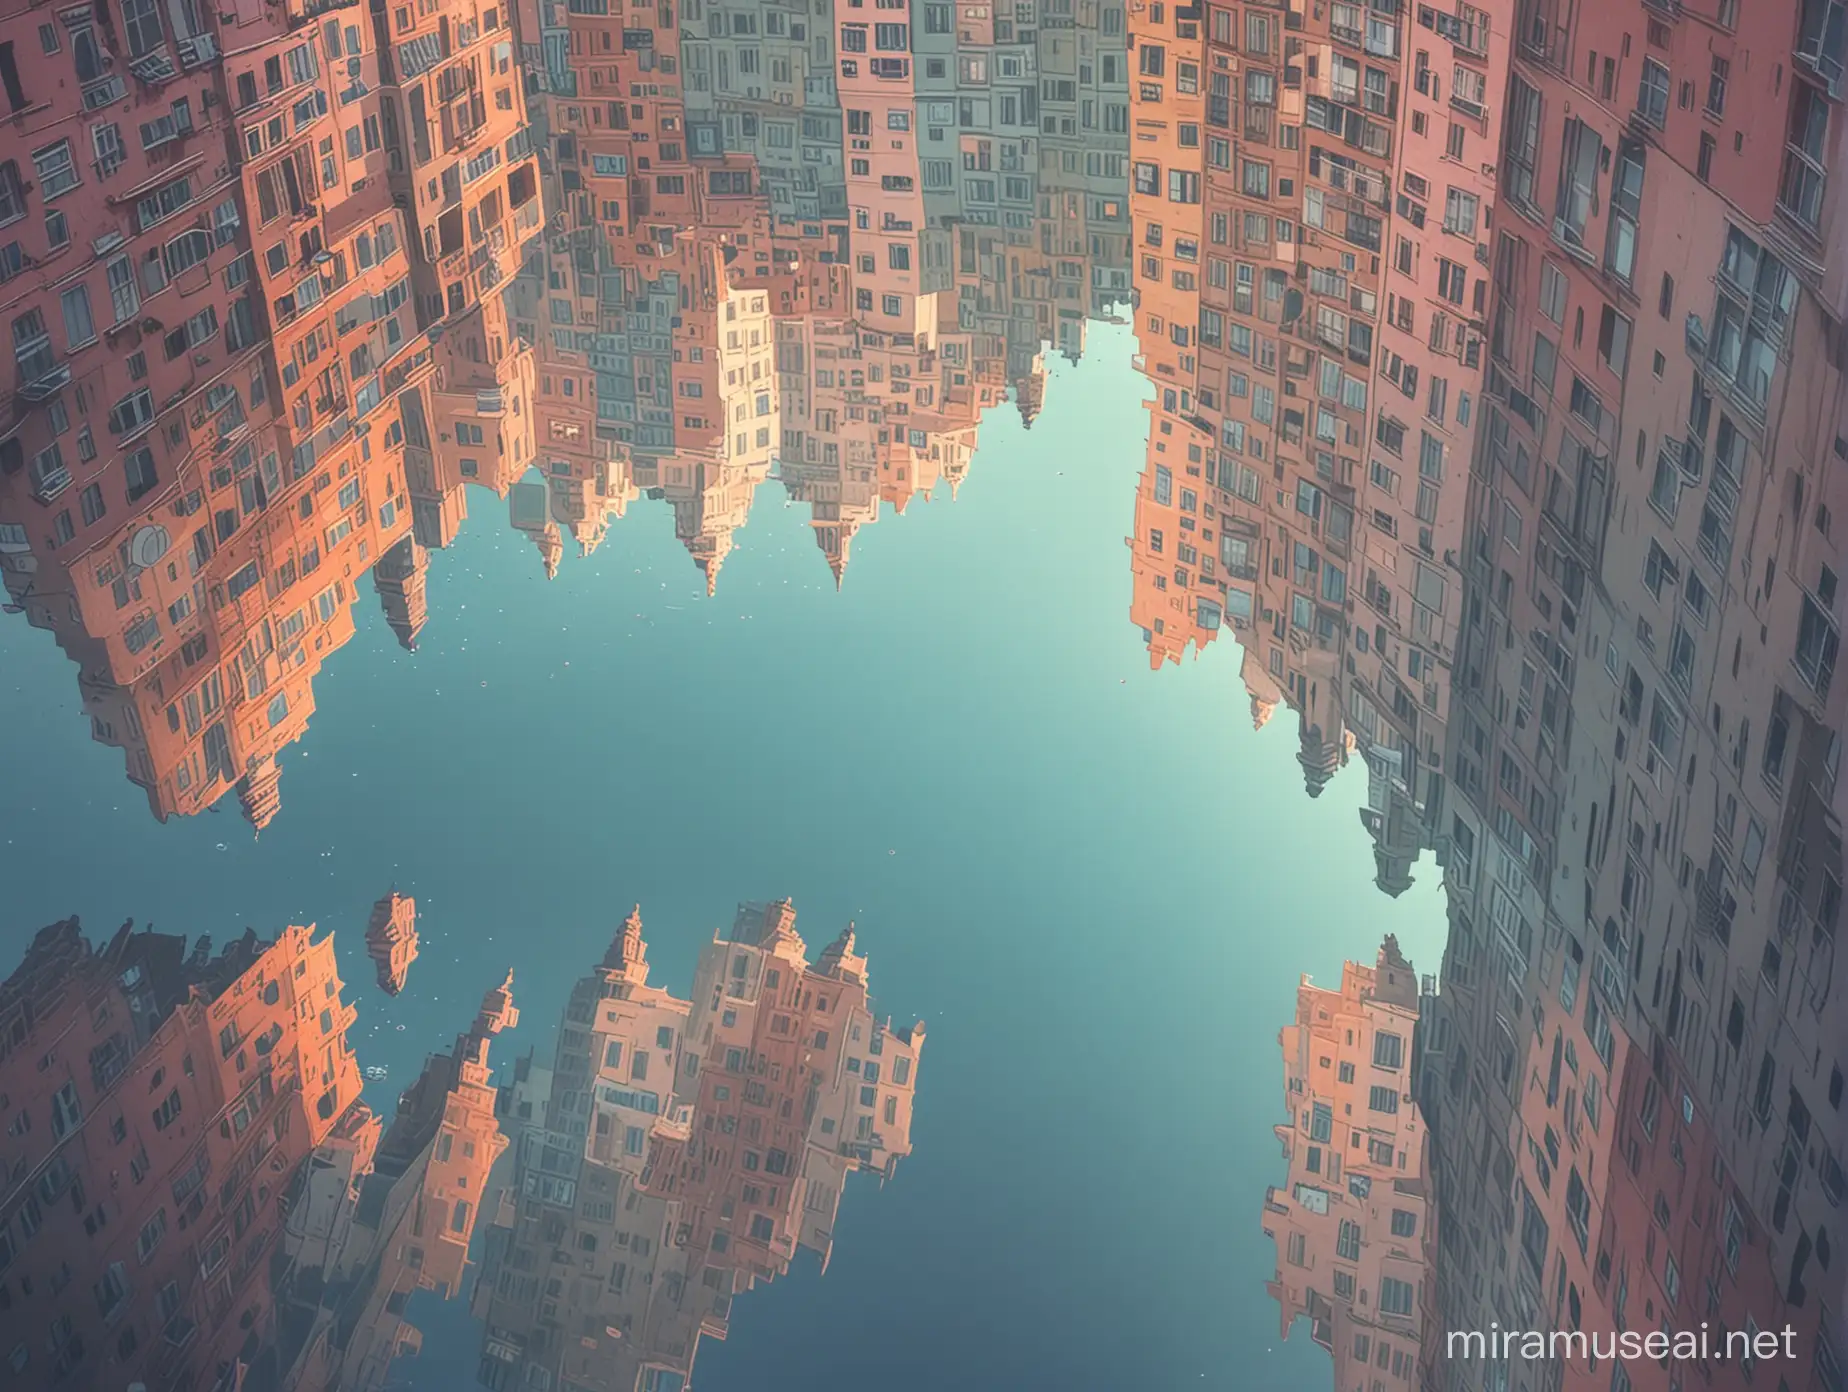 The reflects under water of a city, with an atmosphere in pastel colors and orizontal view